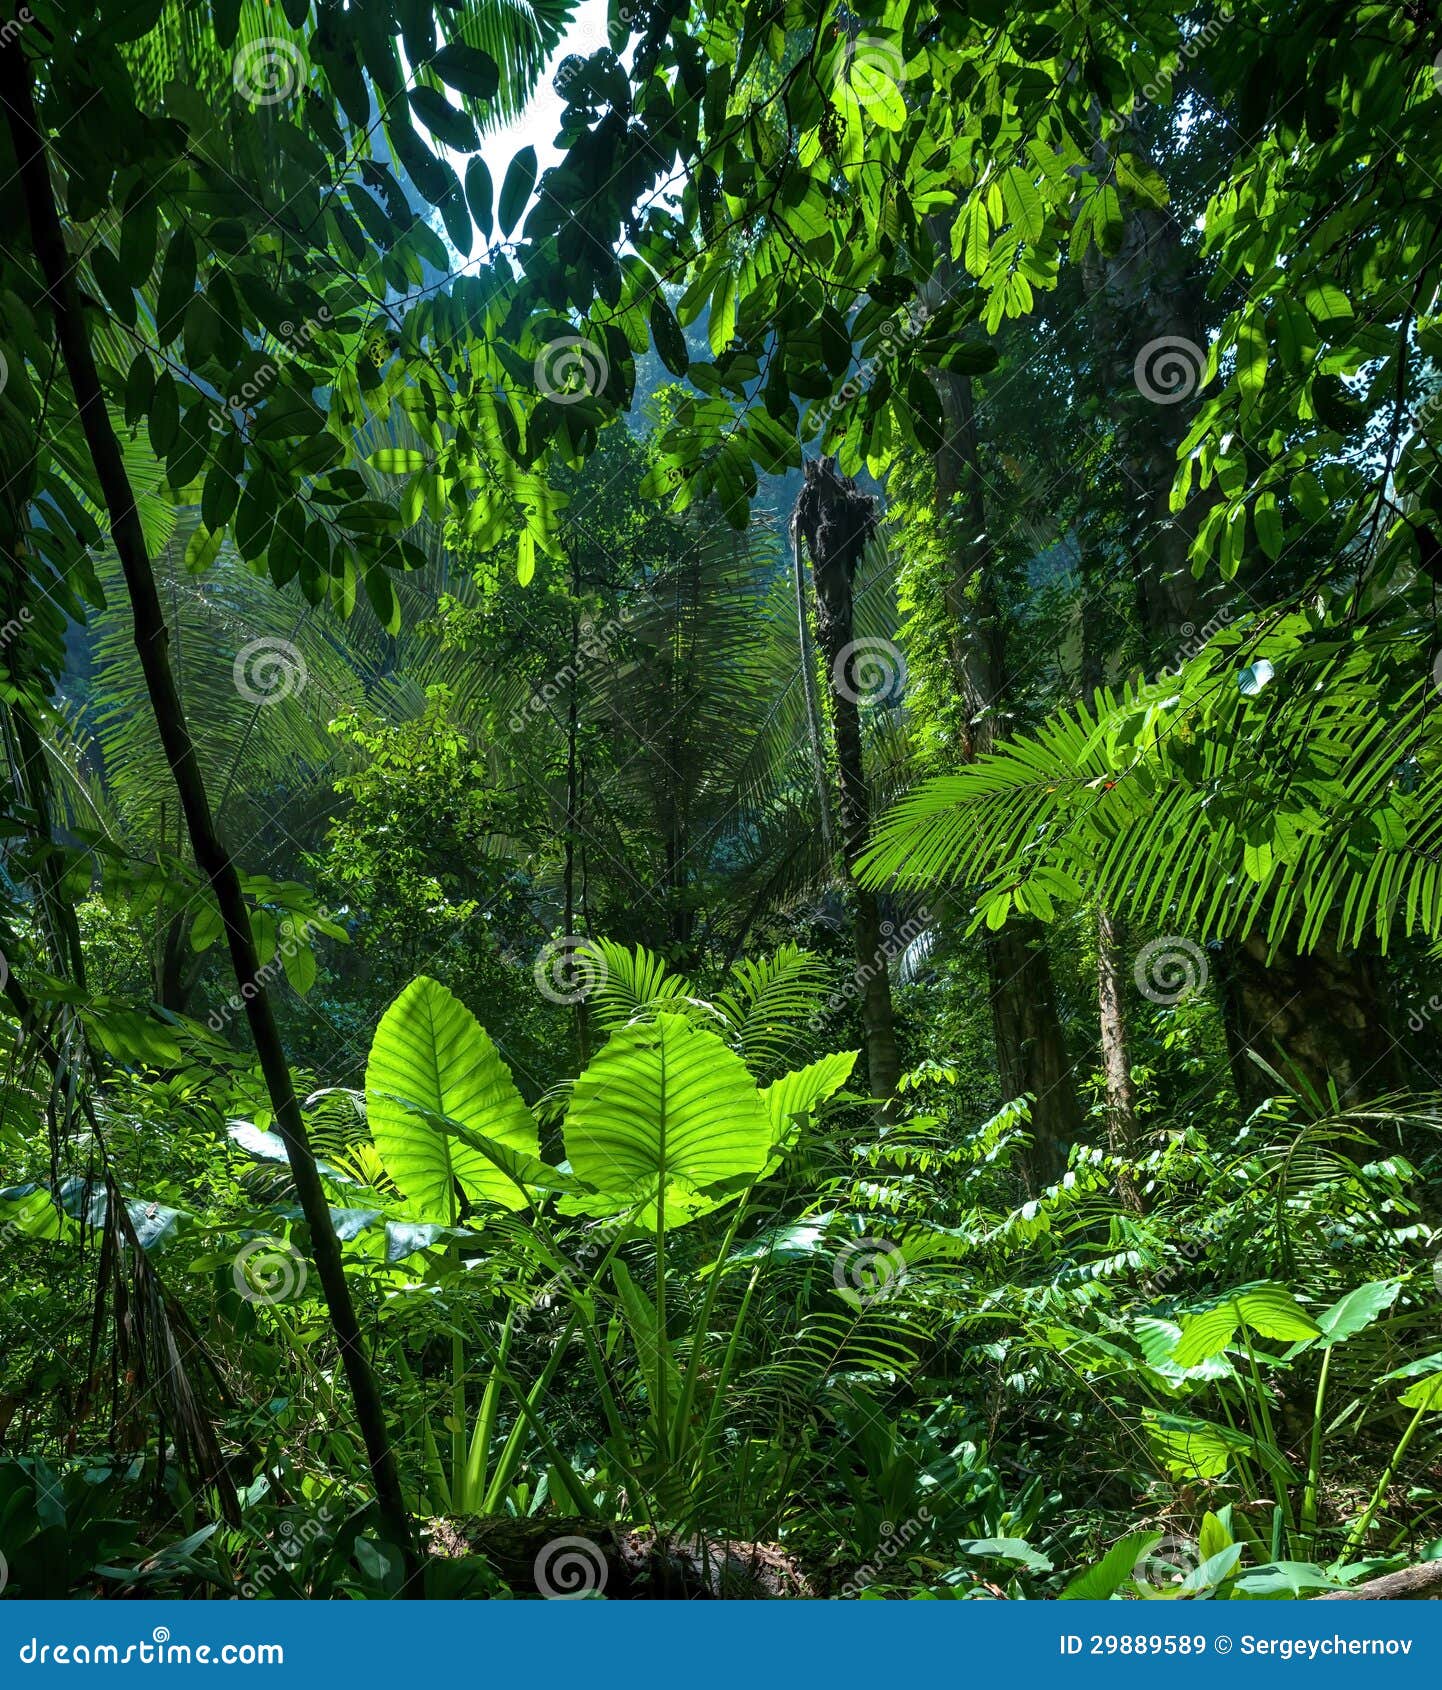 Adventure Background. Green Jungle Stock Image - Image of color